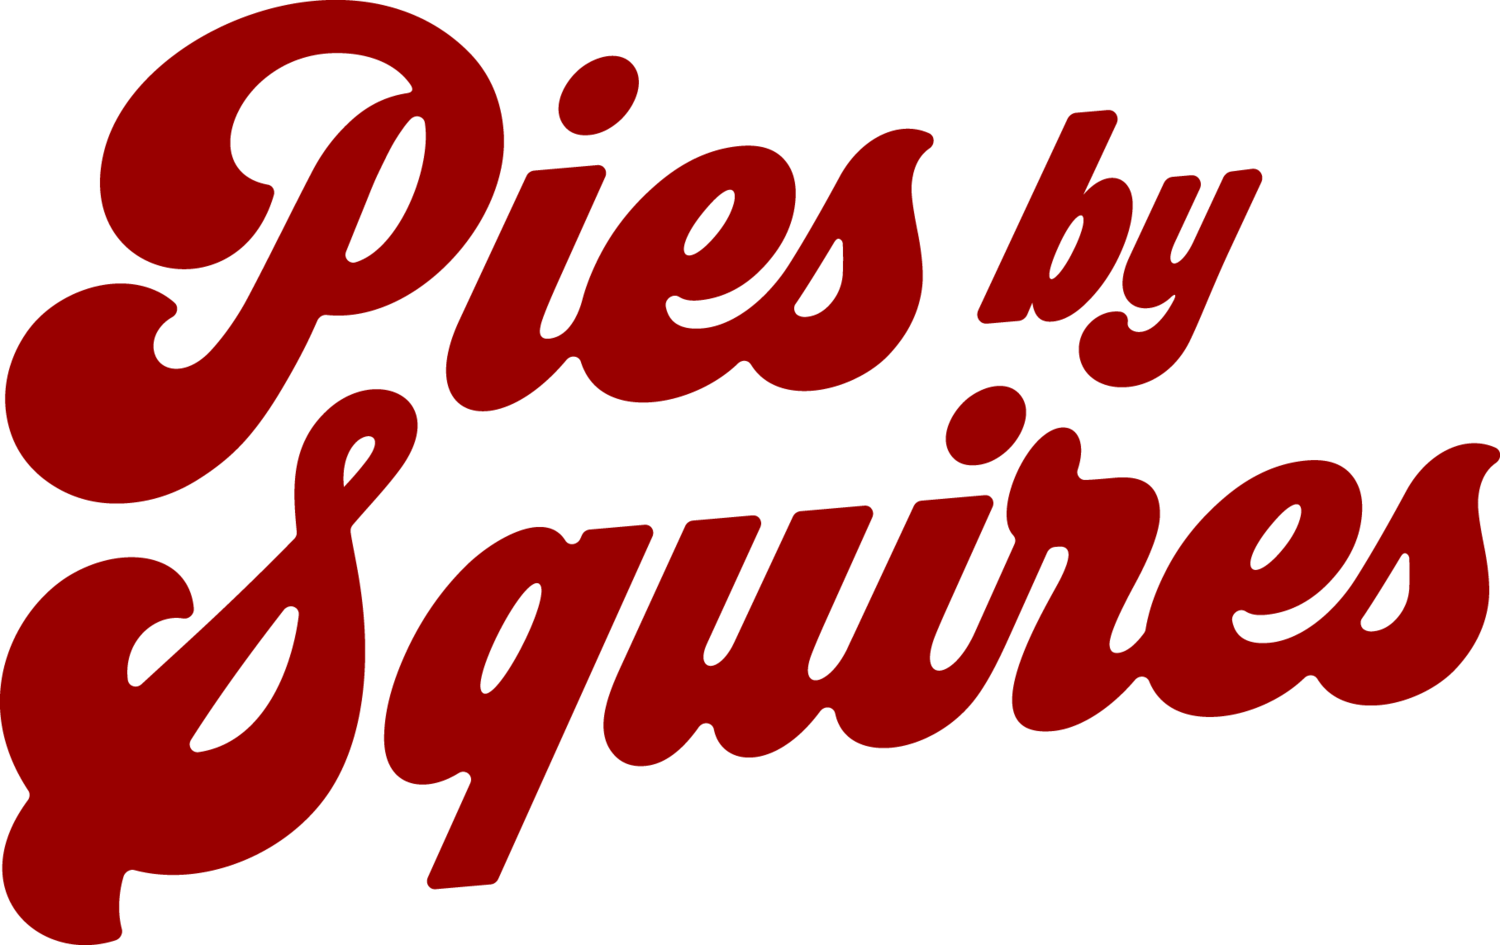 Pies by Squires